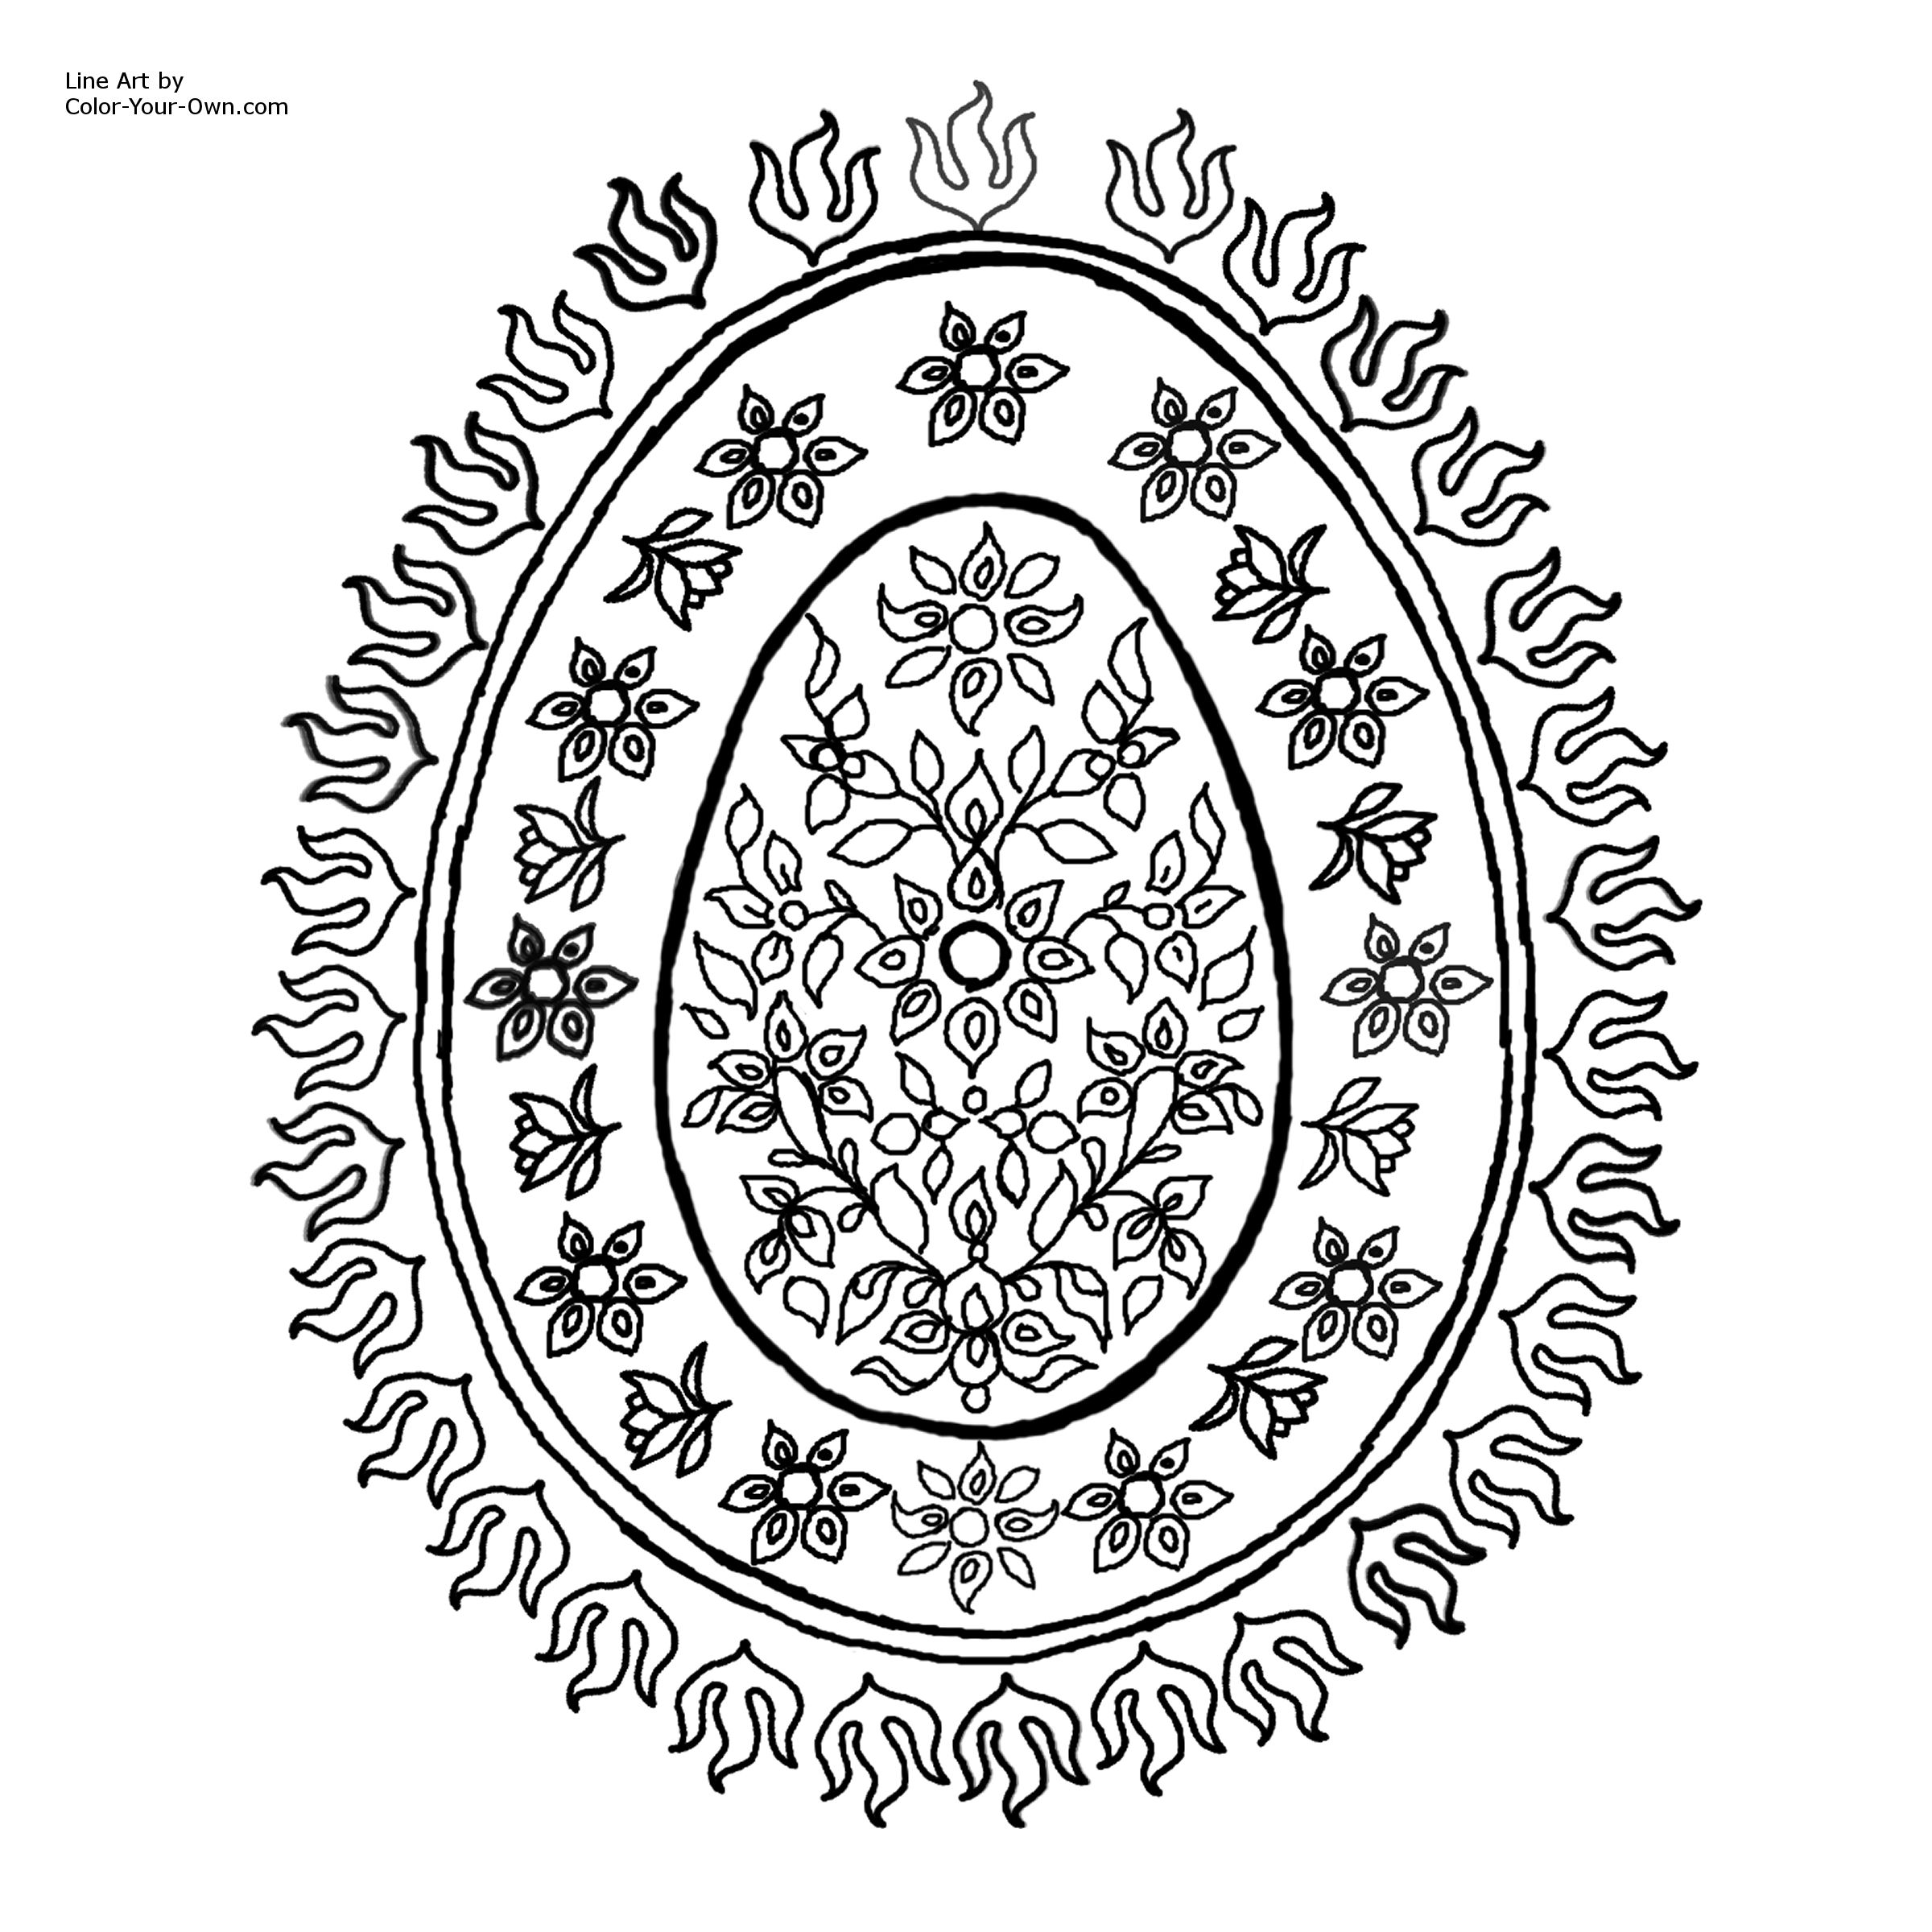 Decorative Egg Pattern with Flowers Coloring Page for Easter